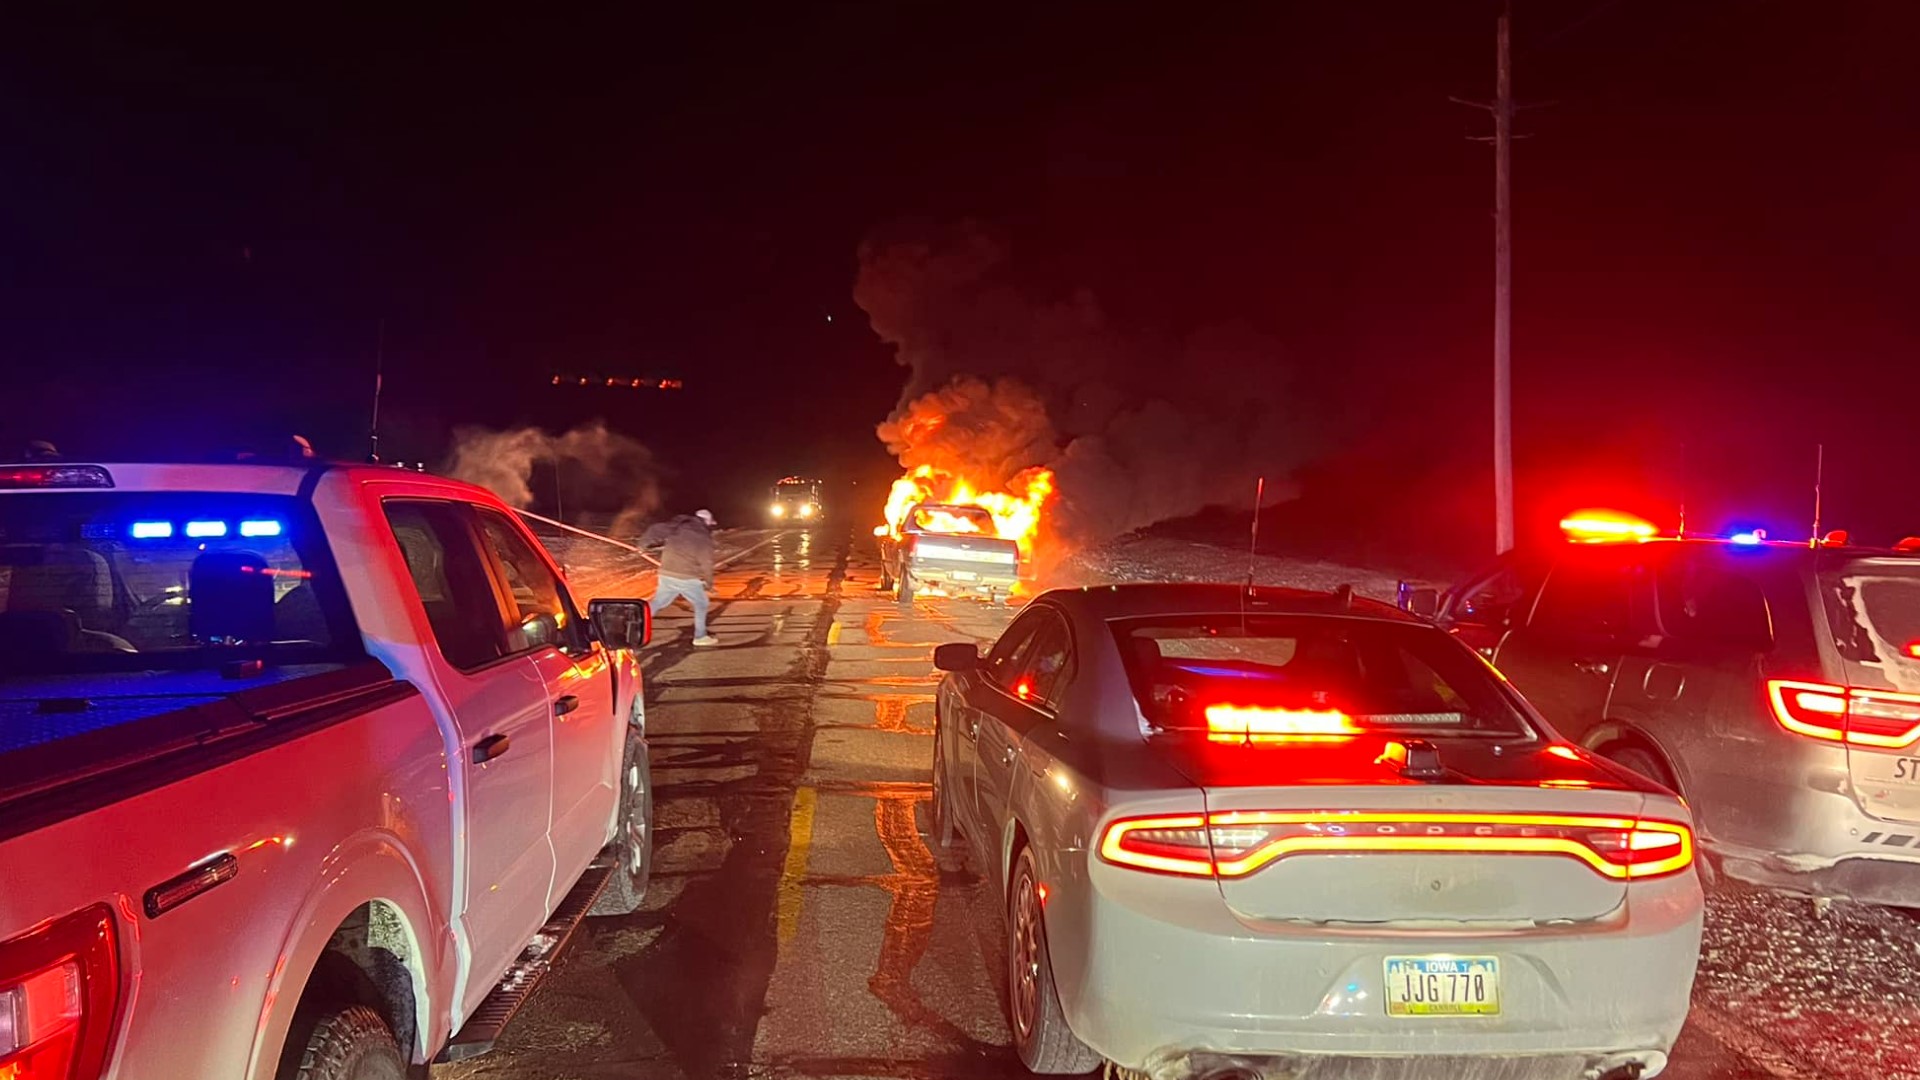 An Iowa driver is in custody after hitting two patrol cars, leaving the scene and "revving" their engine until a vehicle fire began.